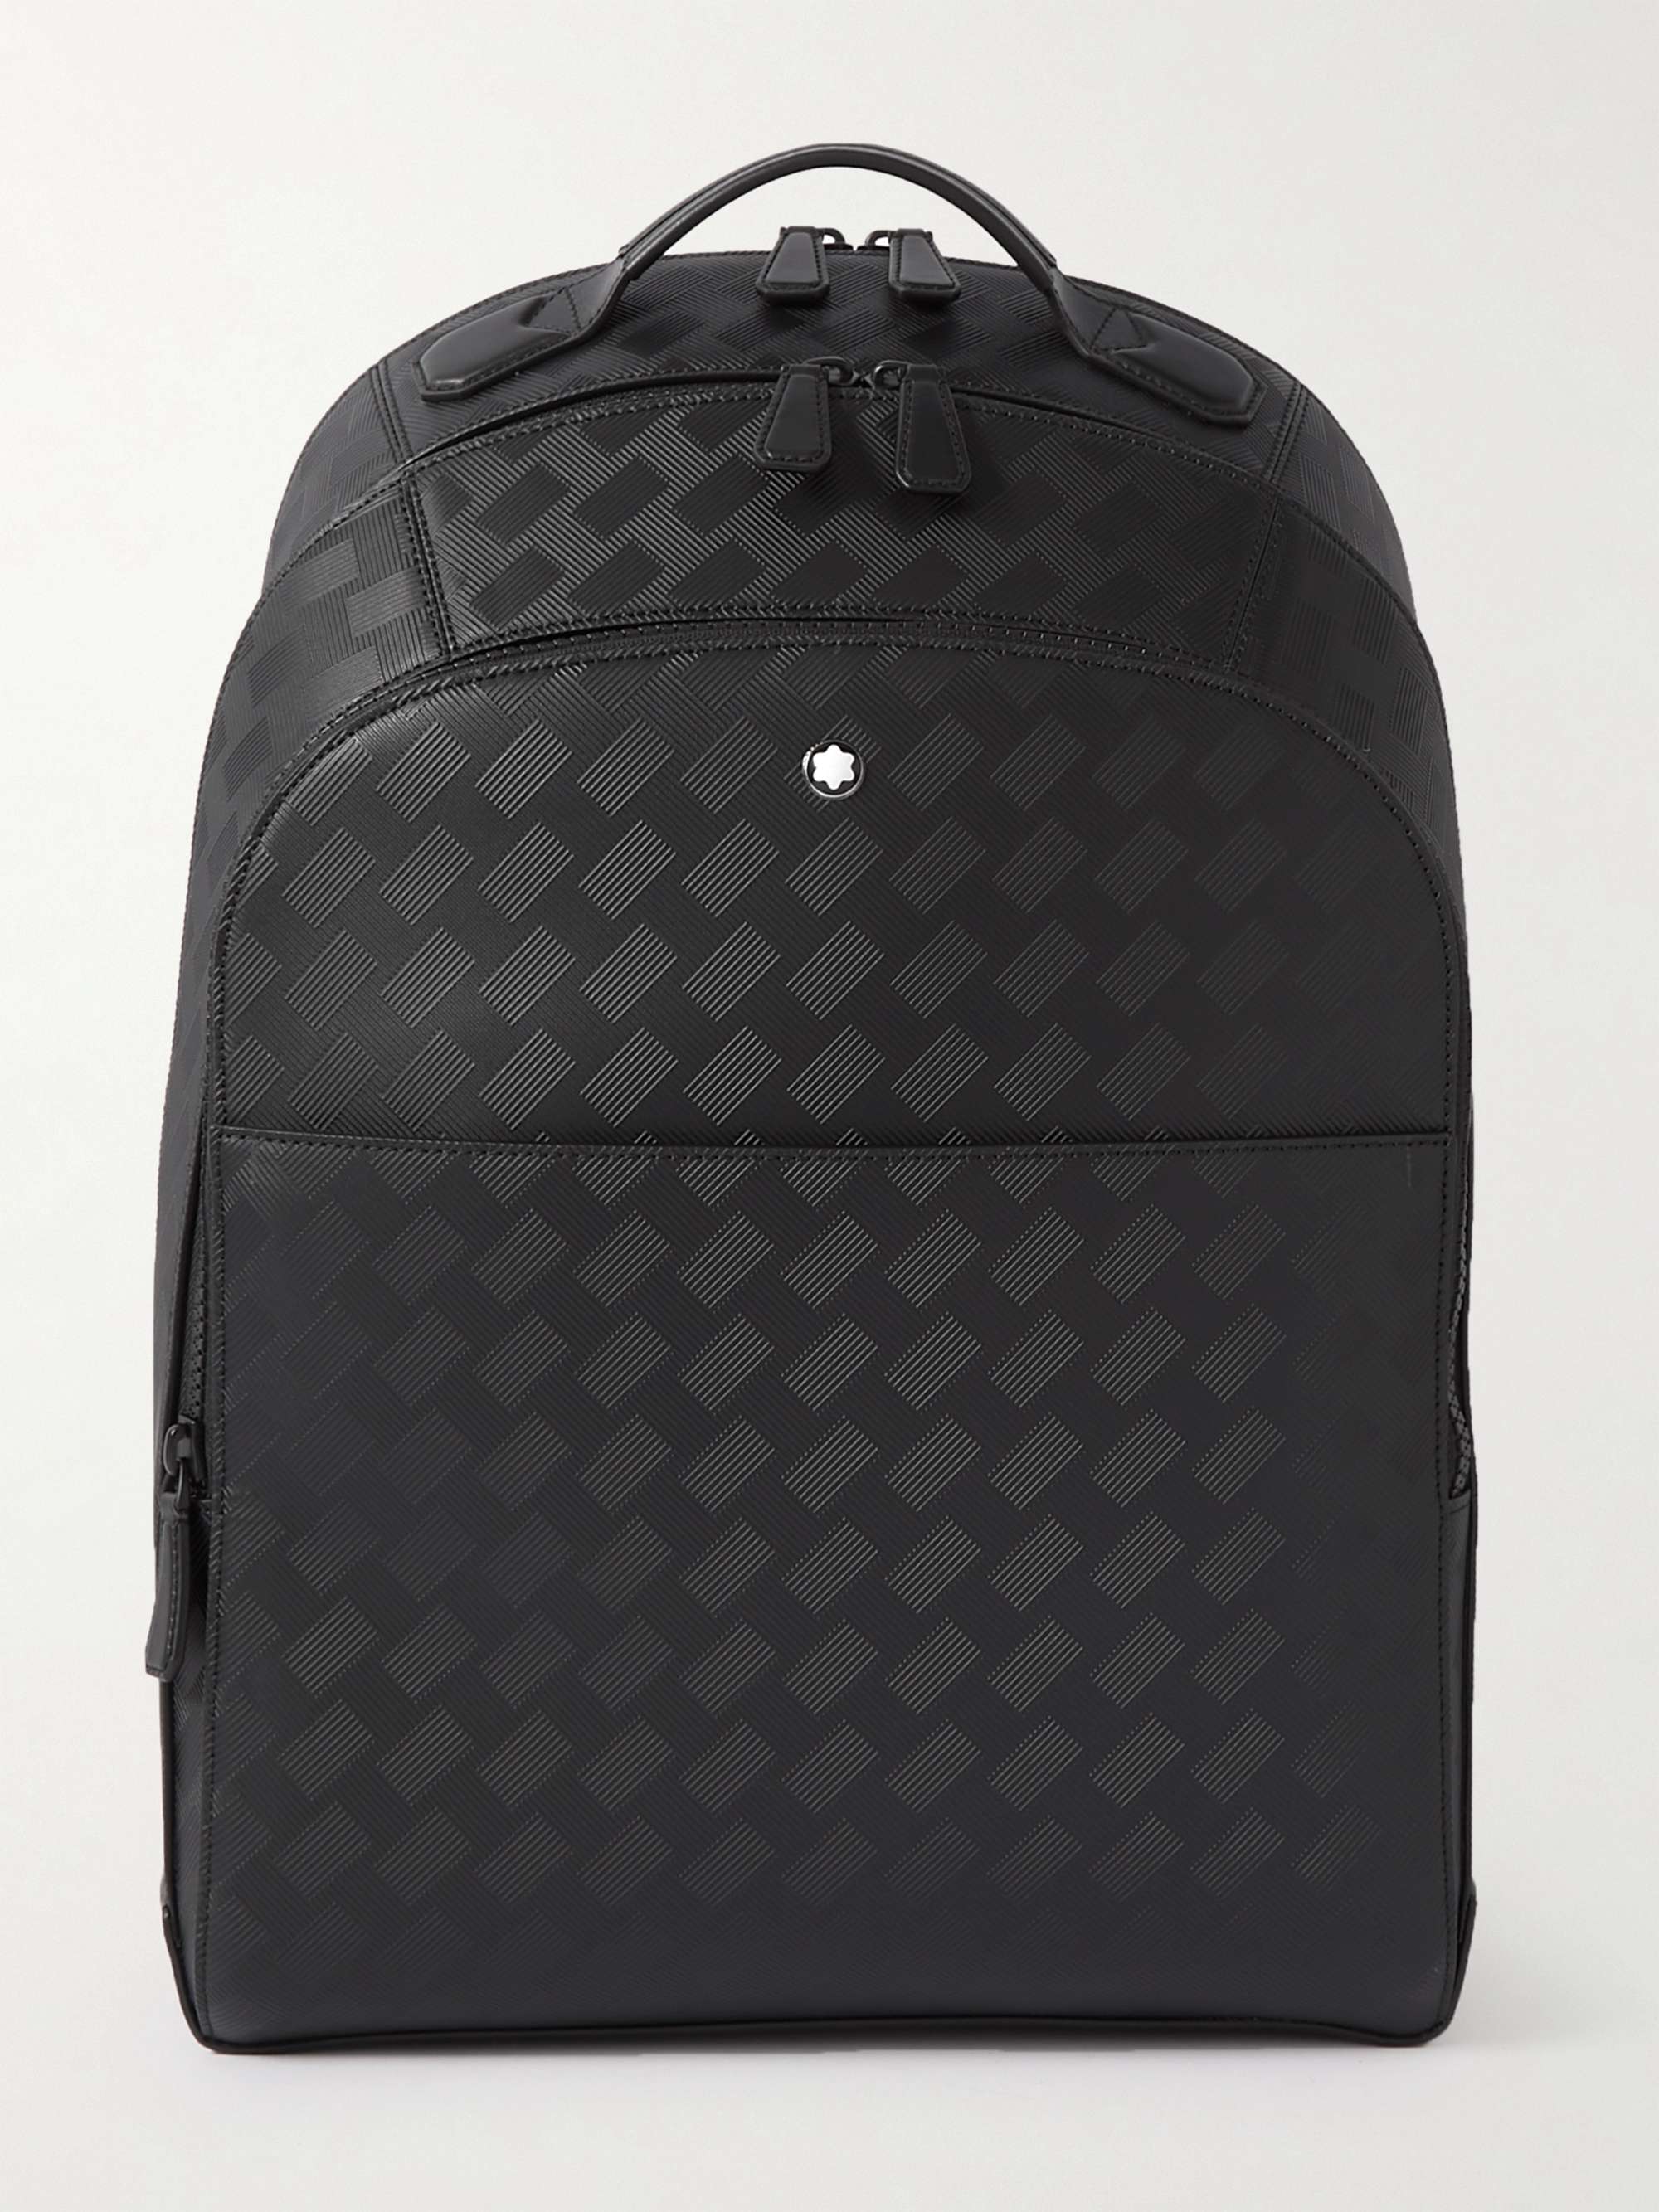 MONTBLANC Extreme 3.0 Large Cross-Grain Leather Backpack